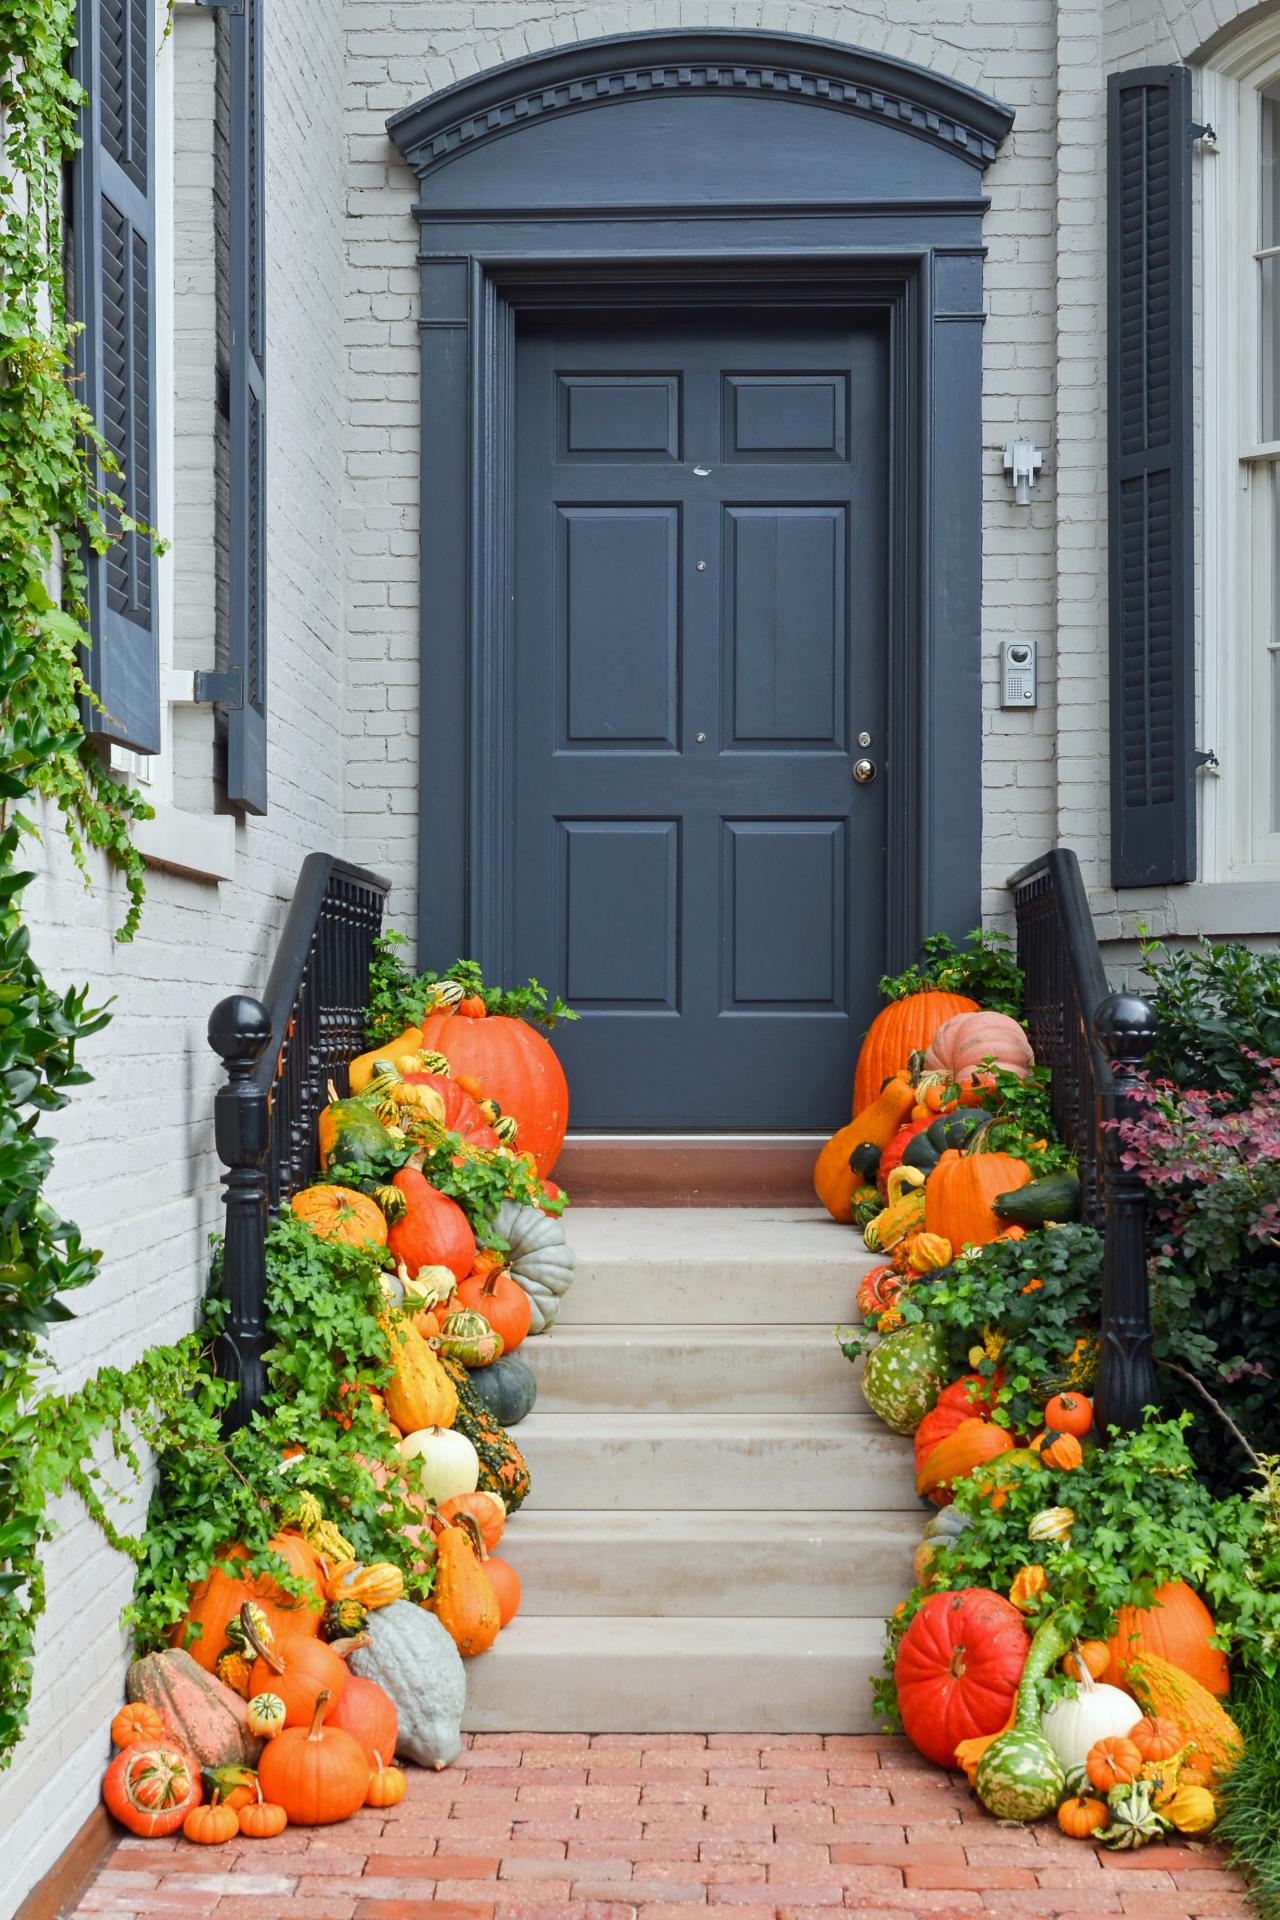 outdoor decorating ideas find more fall decorating ideas BRRFKIS